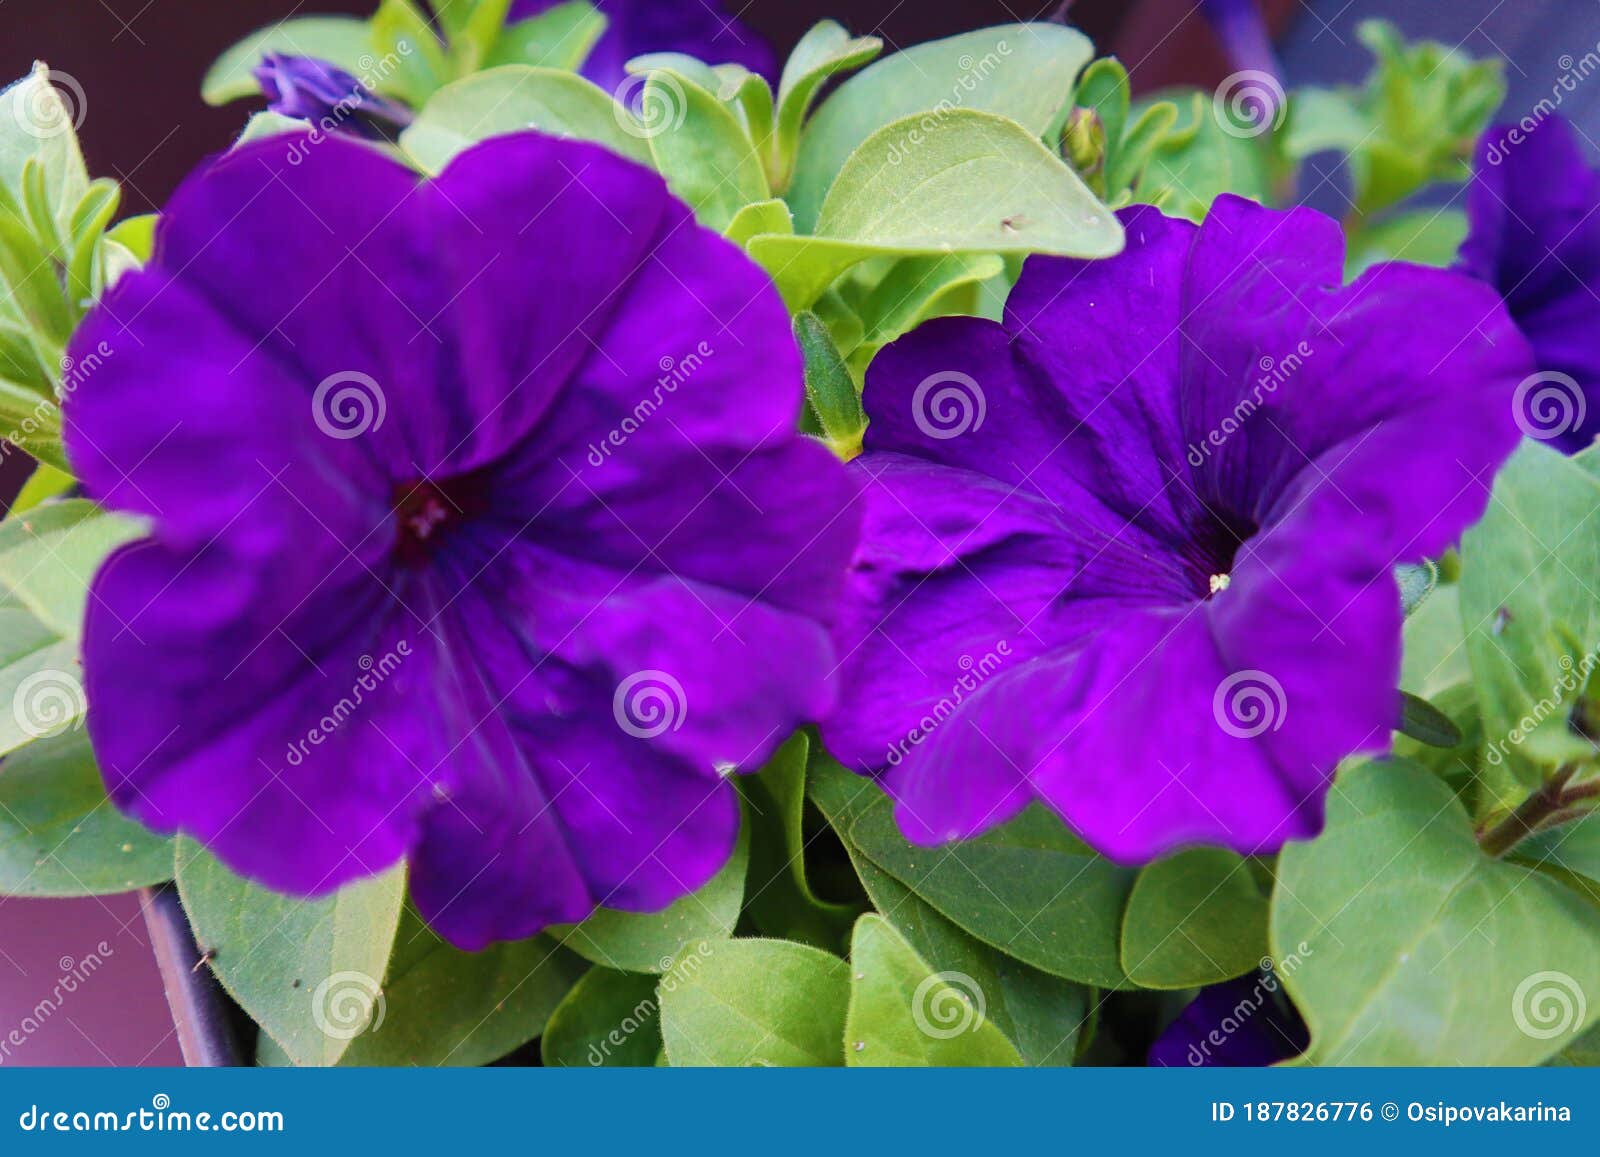 Two purple Petunia flowers stock photo. Image of floral - 187826776